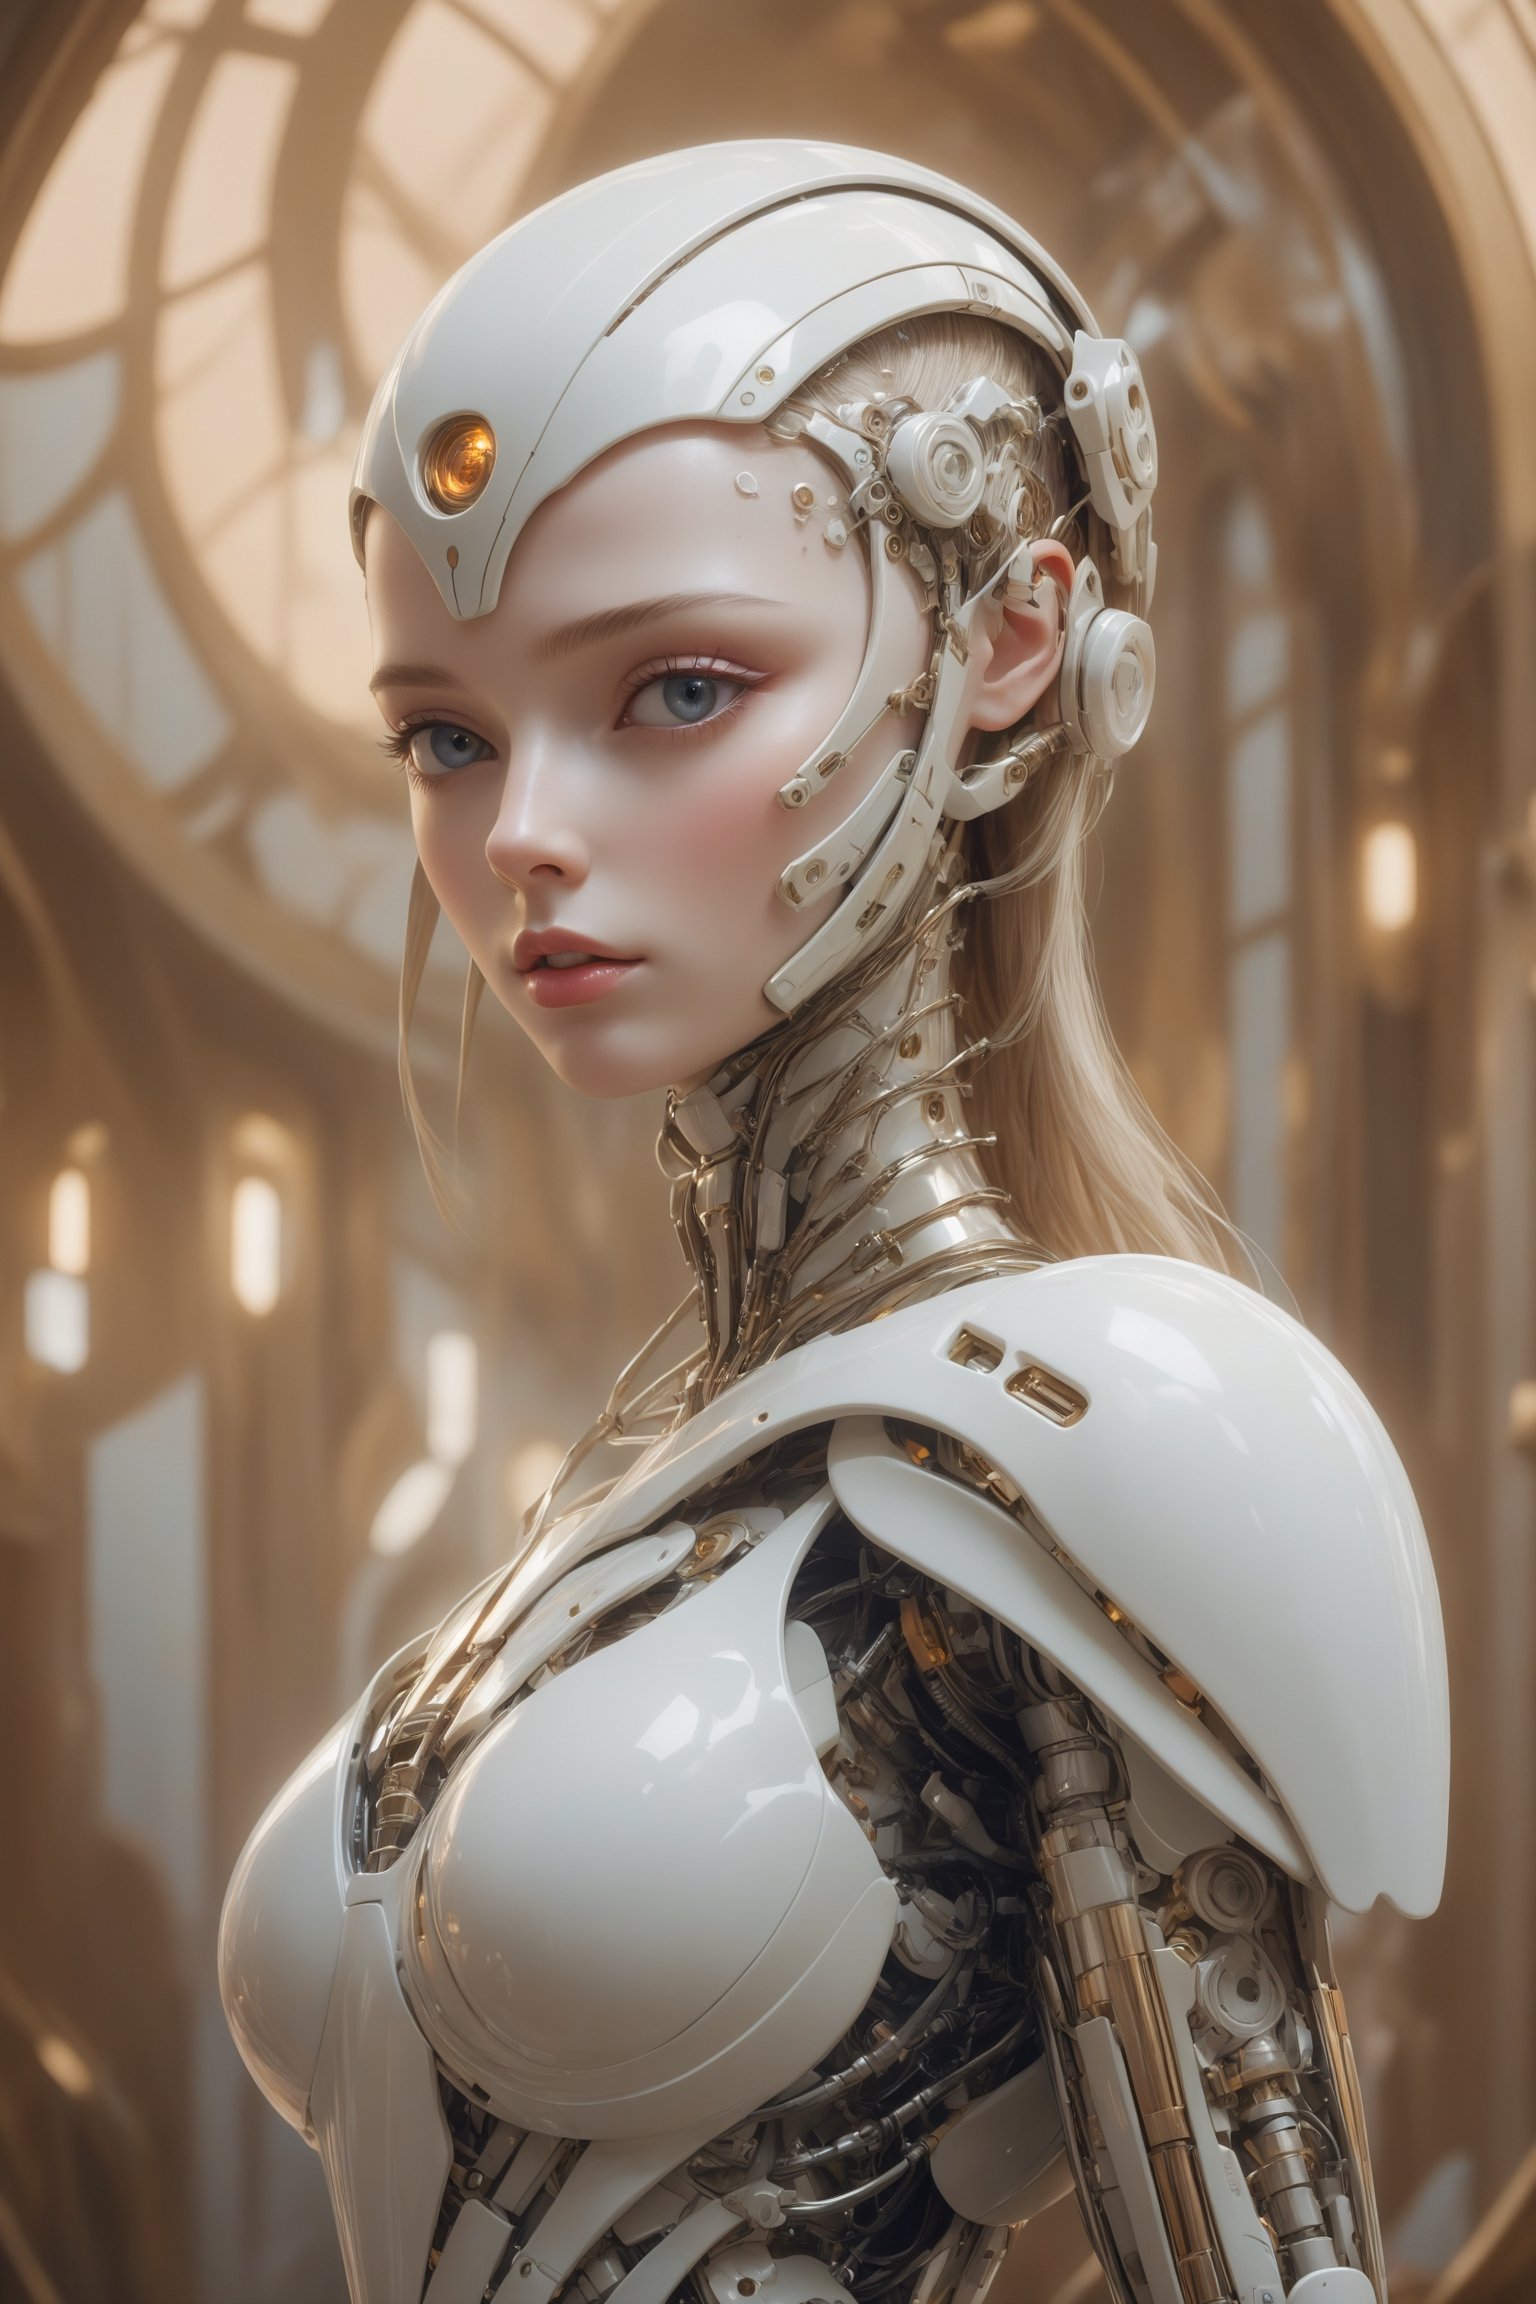 Masterpiece, {{{full_body}}}, {{{full_figure}}}, Oil painting of an beautiful female cyborg. Pale white skin with a rubbery plastic look, glistening, pearlescent skin. beautiful face, made to look almost human, but has an eerie quality, vacant eyes, luscious pouting lips, dreamlike, hyperrealistic, instanely detailled soft color, dreamlike, surrealism, plain graduated pale background, intricate details, 3D rendering, octane rendering. Art in pop surrealism lowbrow creepy cute style. Inspired by Ray Caesar. Vintage art, ((art deco background)), opaque colors, light grain, indirect lighting, aesthetic portrait, DonMCyb3rN3cr0XL,cyborg,science fiction